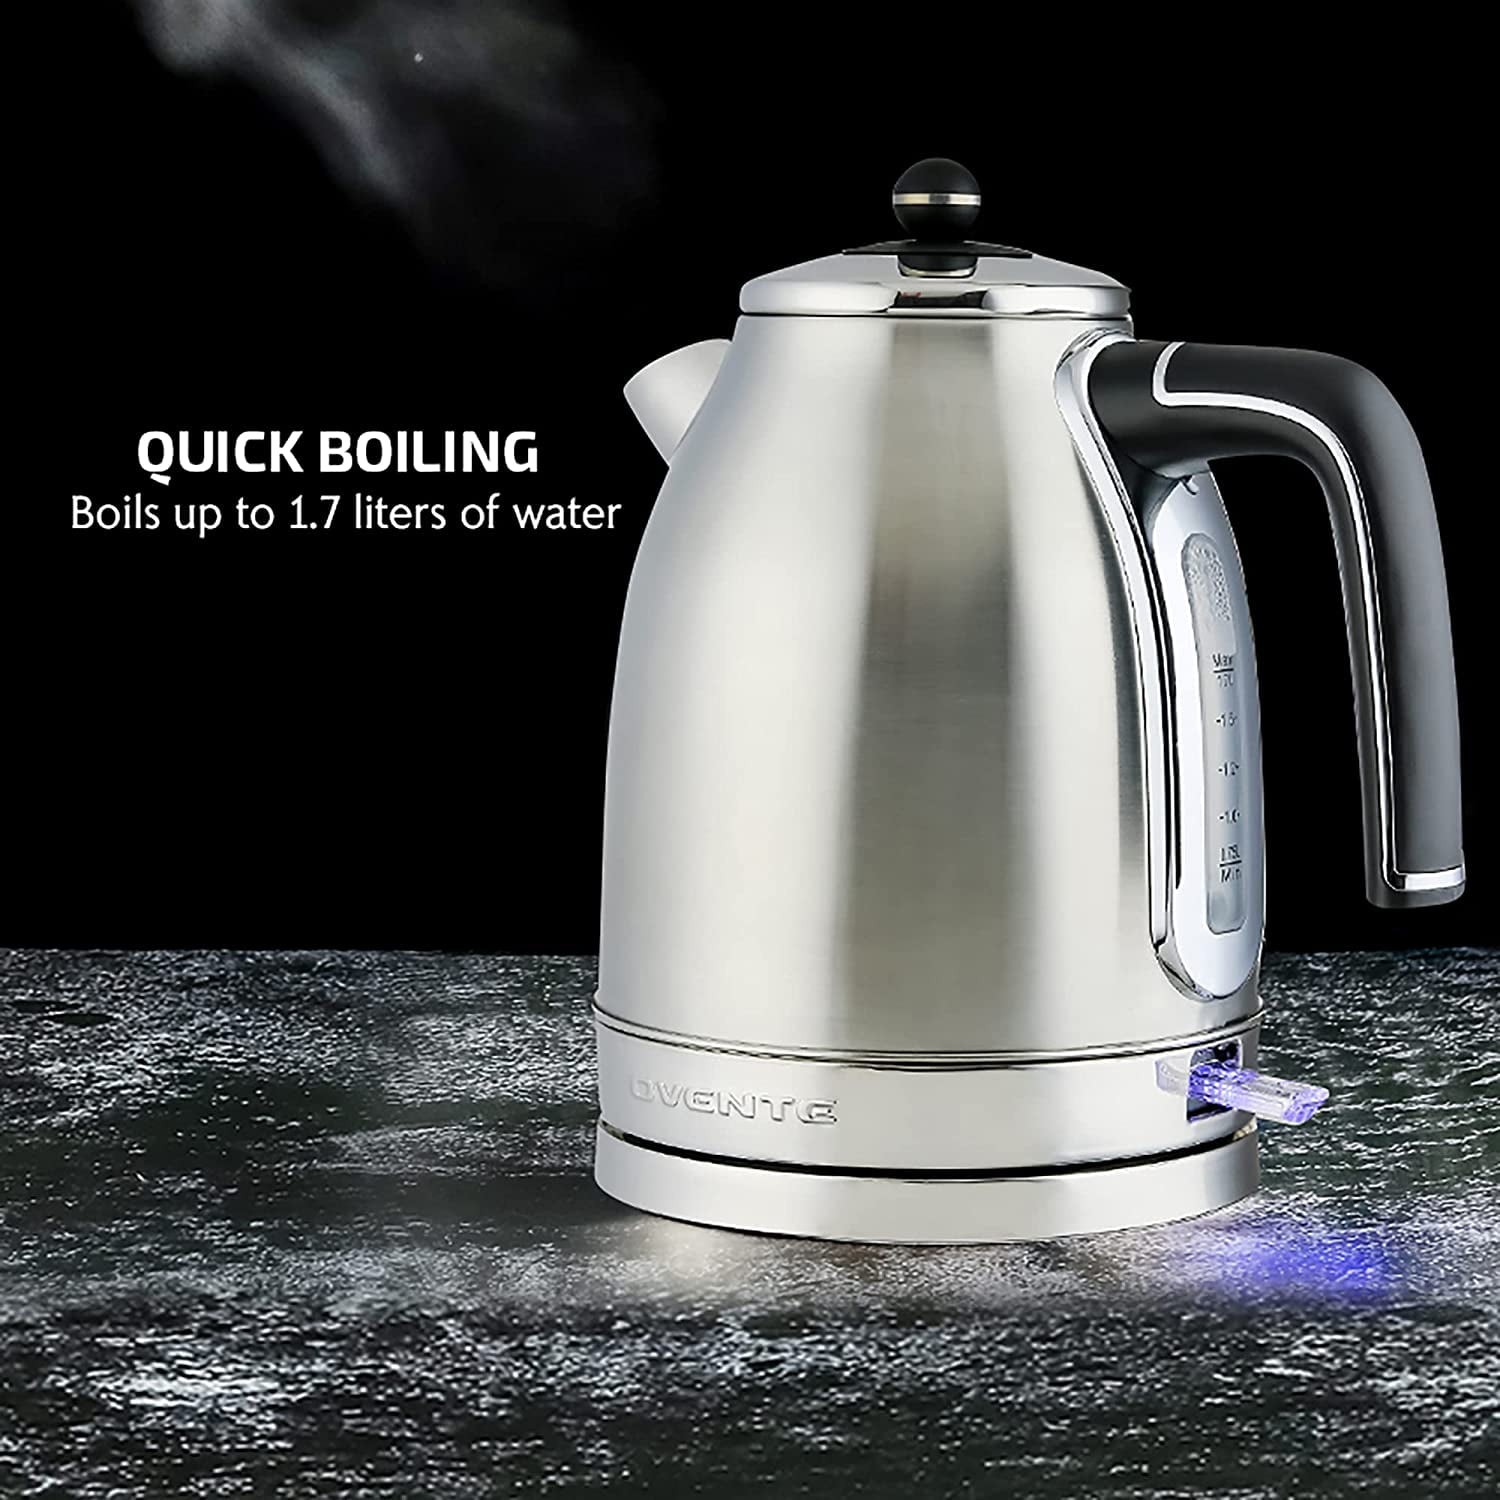 Rae Dunn Electric Water Kettle - Stainless Steel Coffee Maker, 1.7 Liter  Tea Kettle, Electric Hot Water Kettle with Automatic Shut Off Boil-Dry